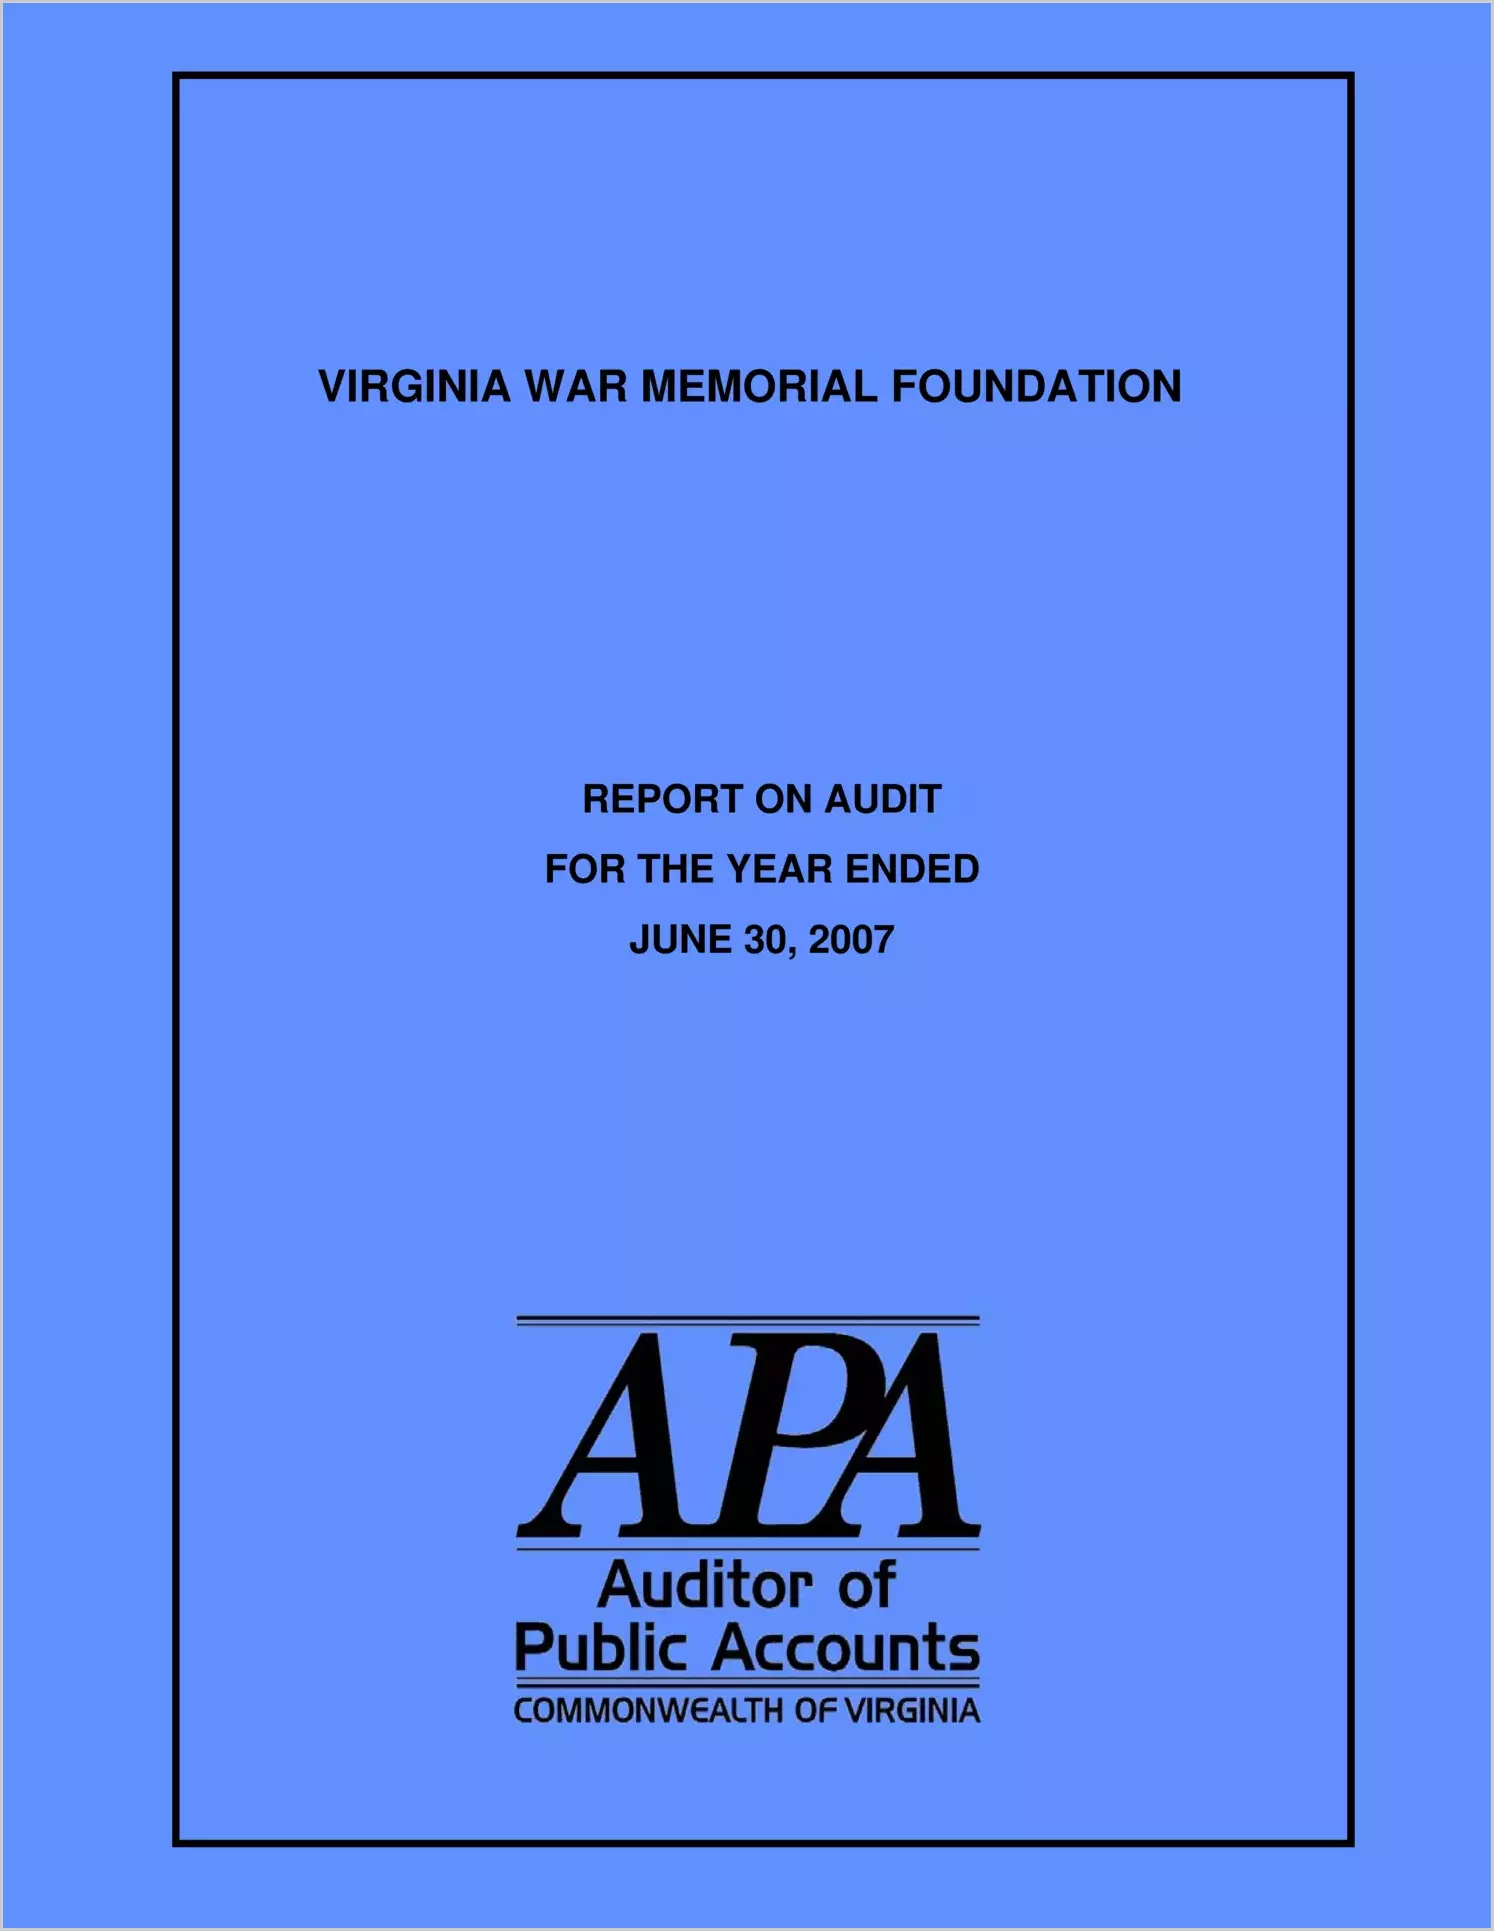 Virginia War Memorial Foundation report on audit for the year ended June 30, 2007